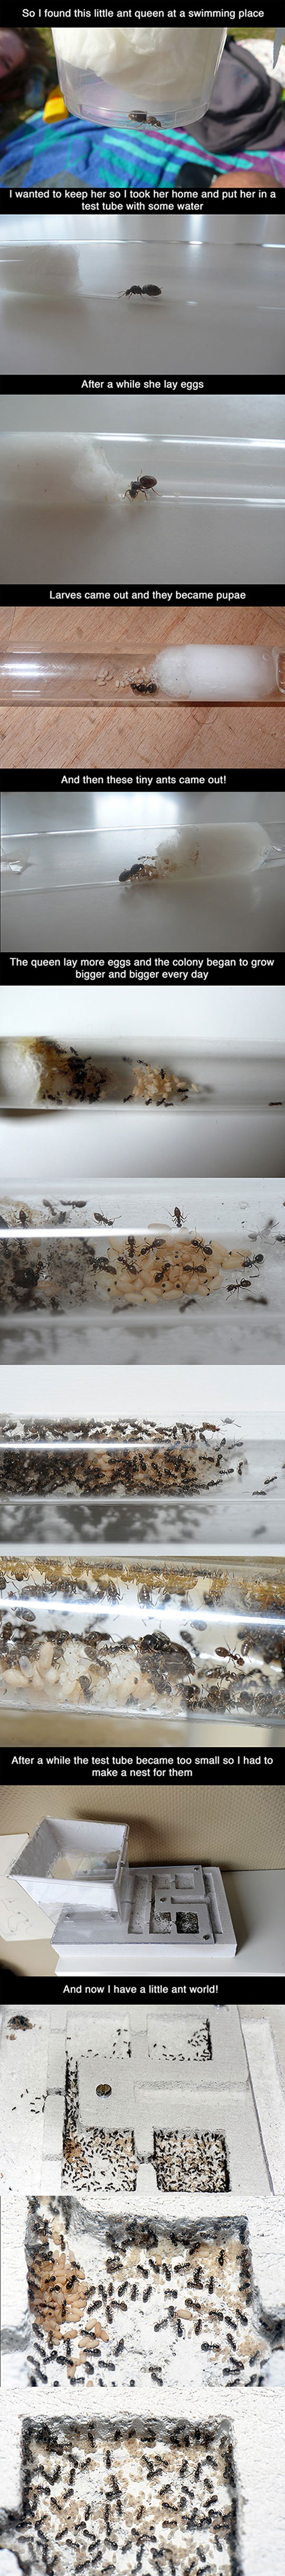 cool-ant-queen-eggs-city